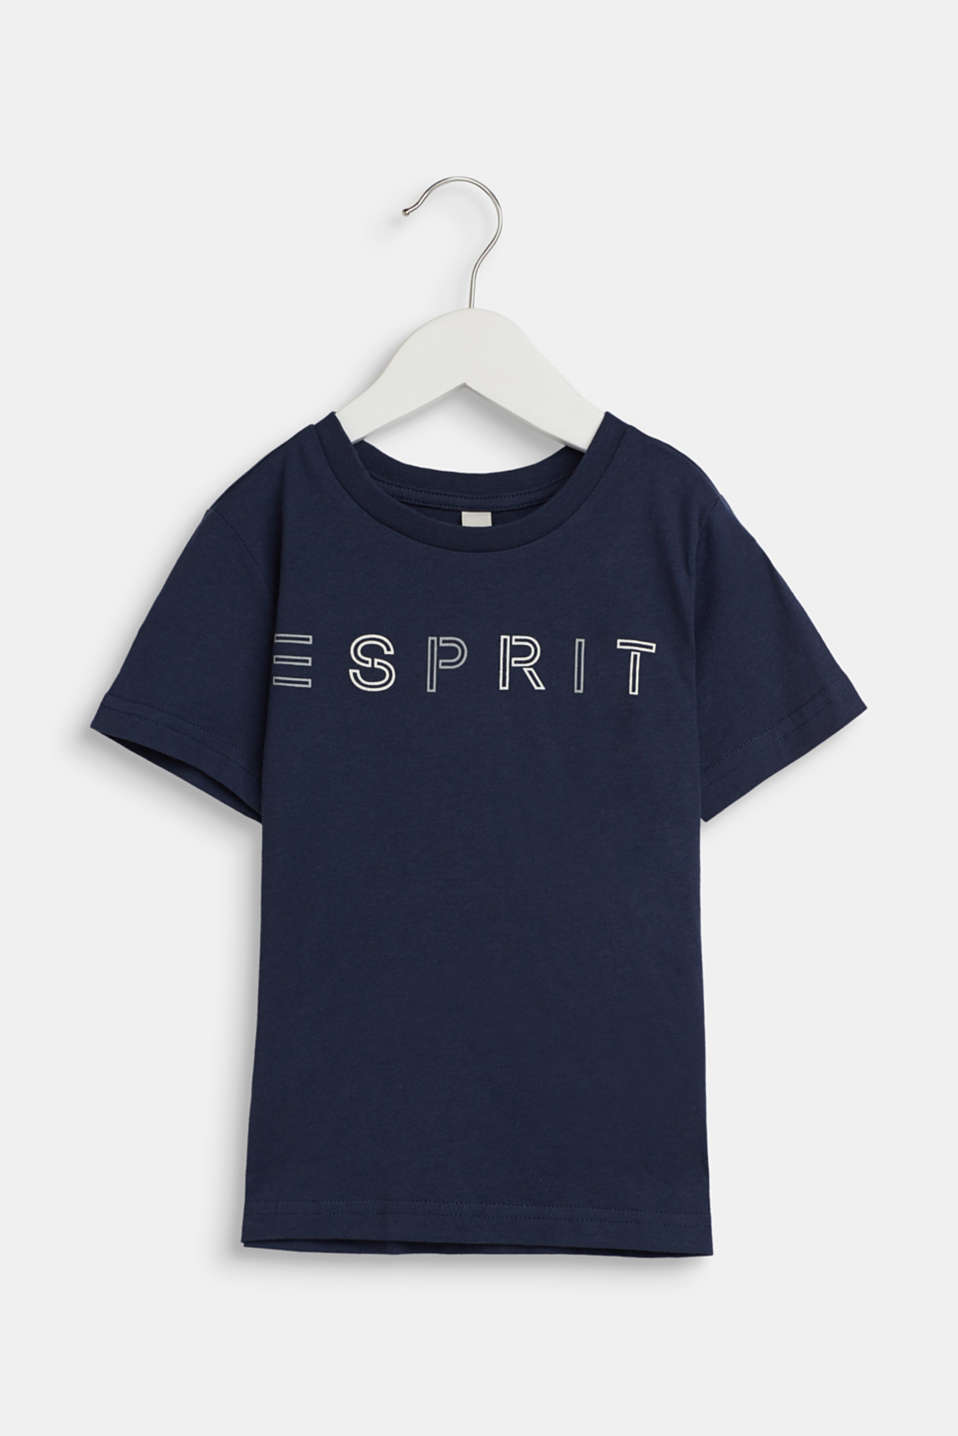 Esprit - T-shirt with a logo print, in jersey at our Online Shop